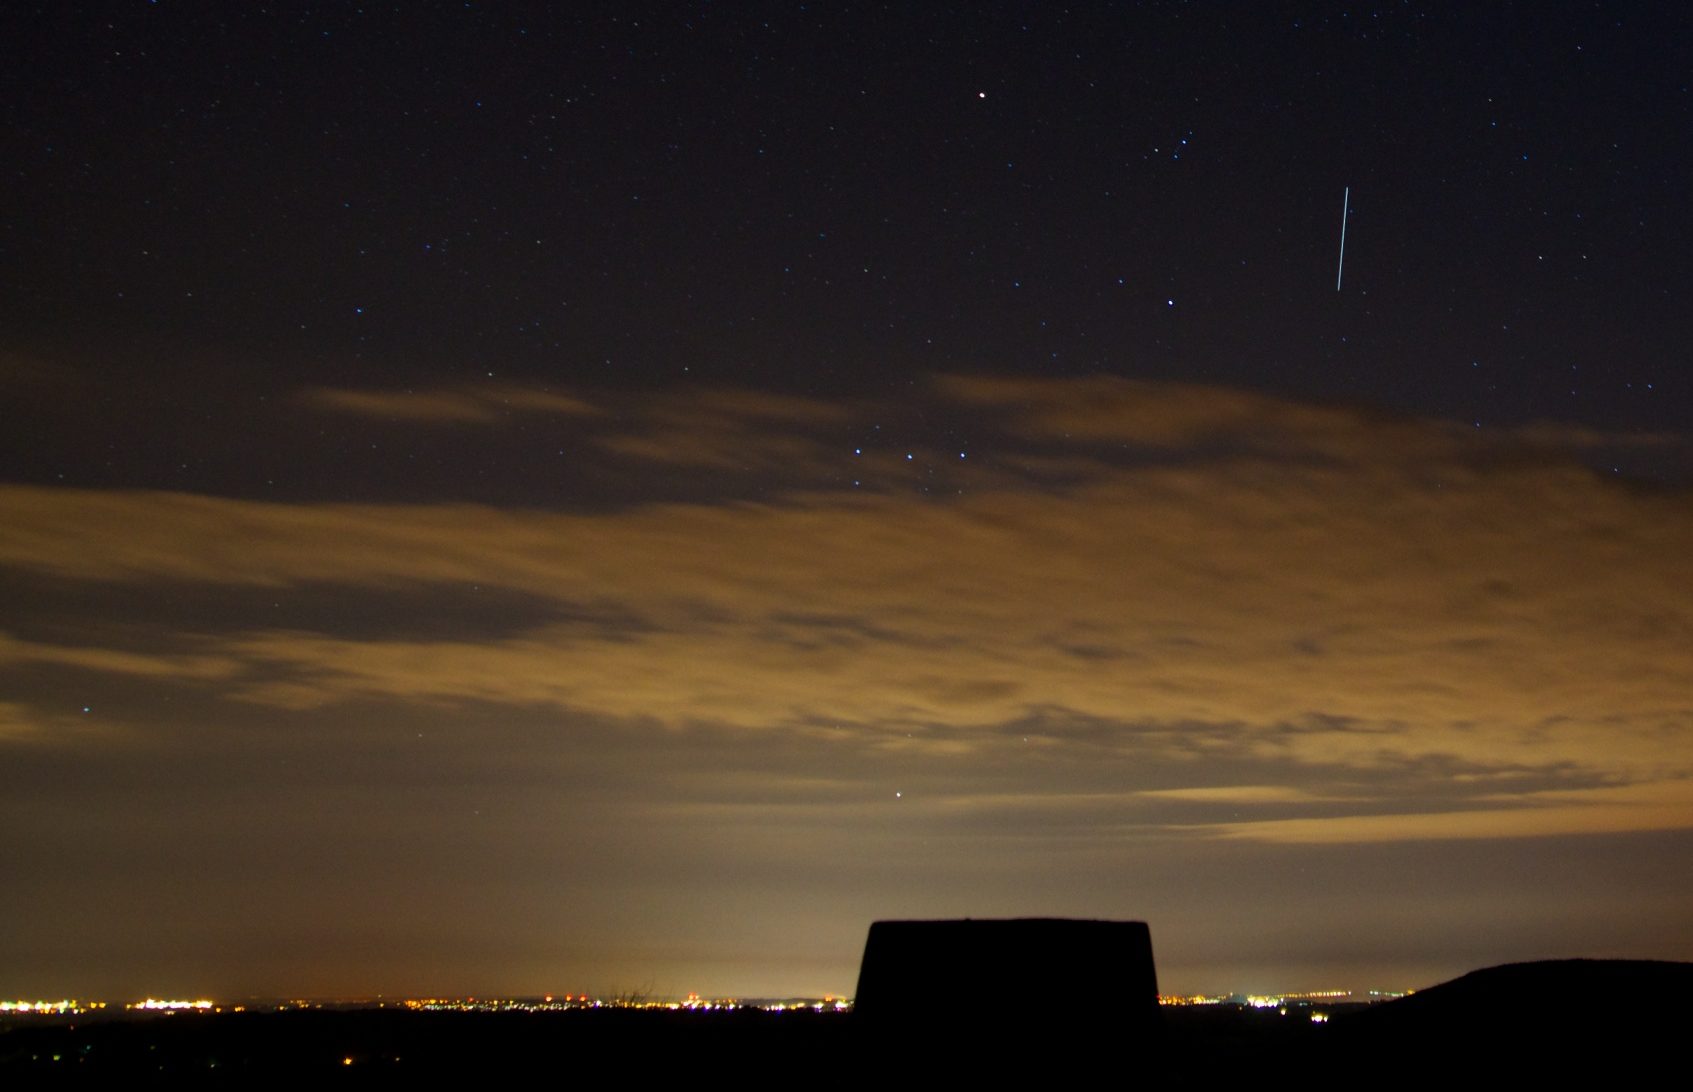 Long exposure image taken from Old Winchester Hill in Hampshire on a fairly clear night, showing a vertical streak of light, which marks the passage of the International Space Station. City lights fill the horizon, and in the foreground is the silhouette of a trig point obelisk.